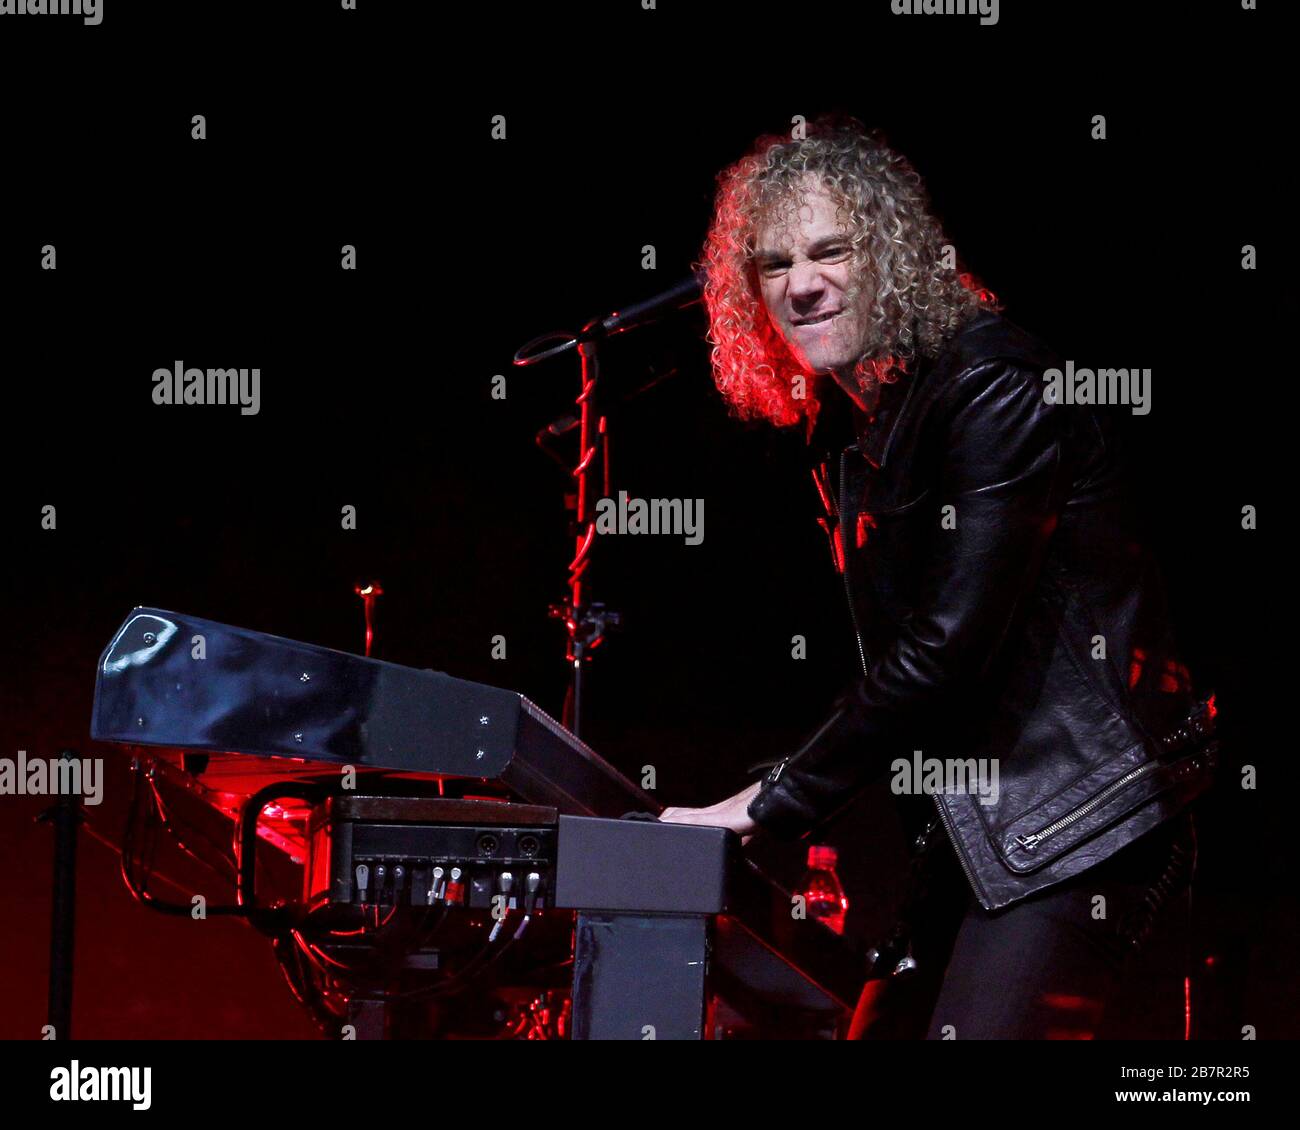 David Bryan performs with Jon Bon Jovi, Richie Sambora, Tico Torres and the rest of the band at the BB&T Center in Sunrise, Florida. Stock Photo